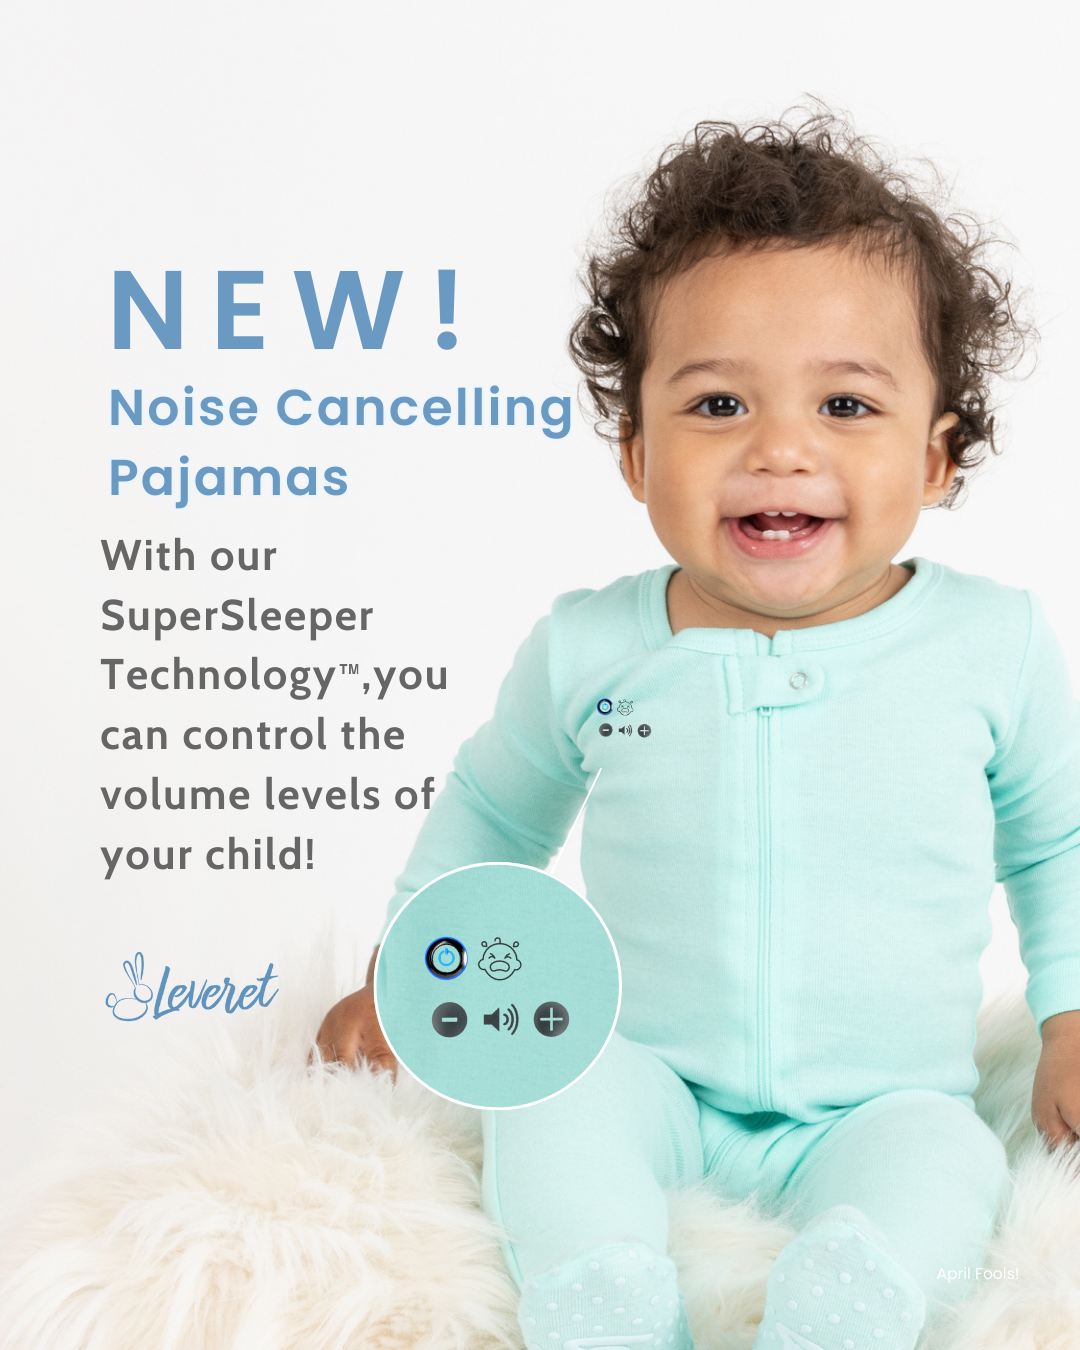 Noise-Cancelling Pajamas: Mute Your Child for a Peaceful Night's Sleep!